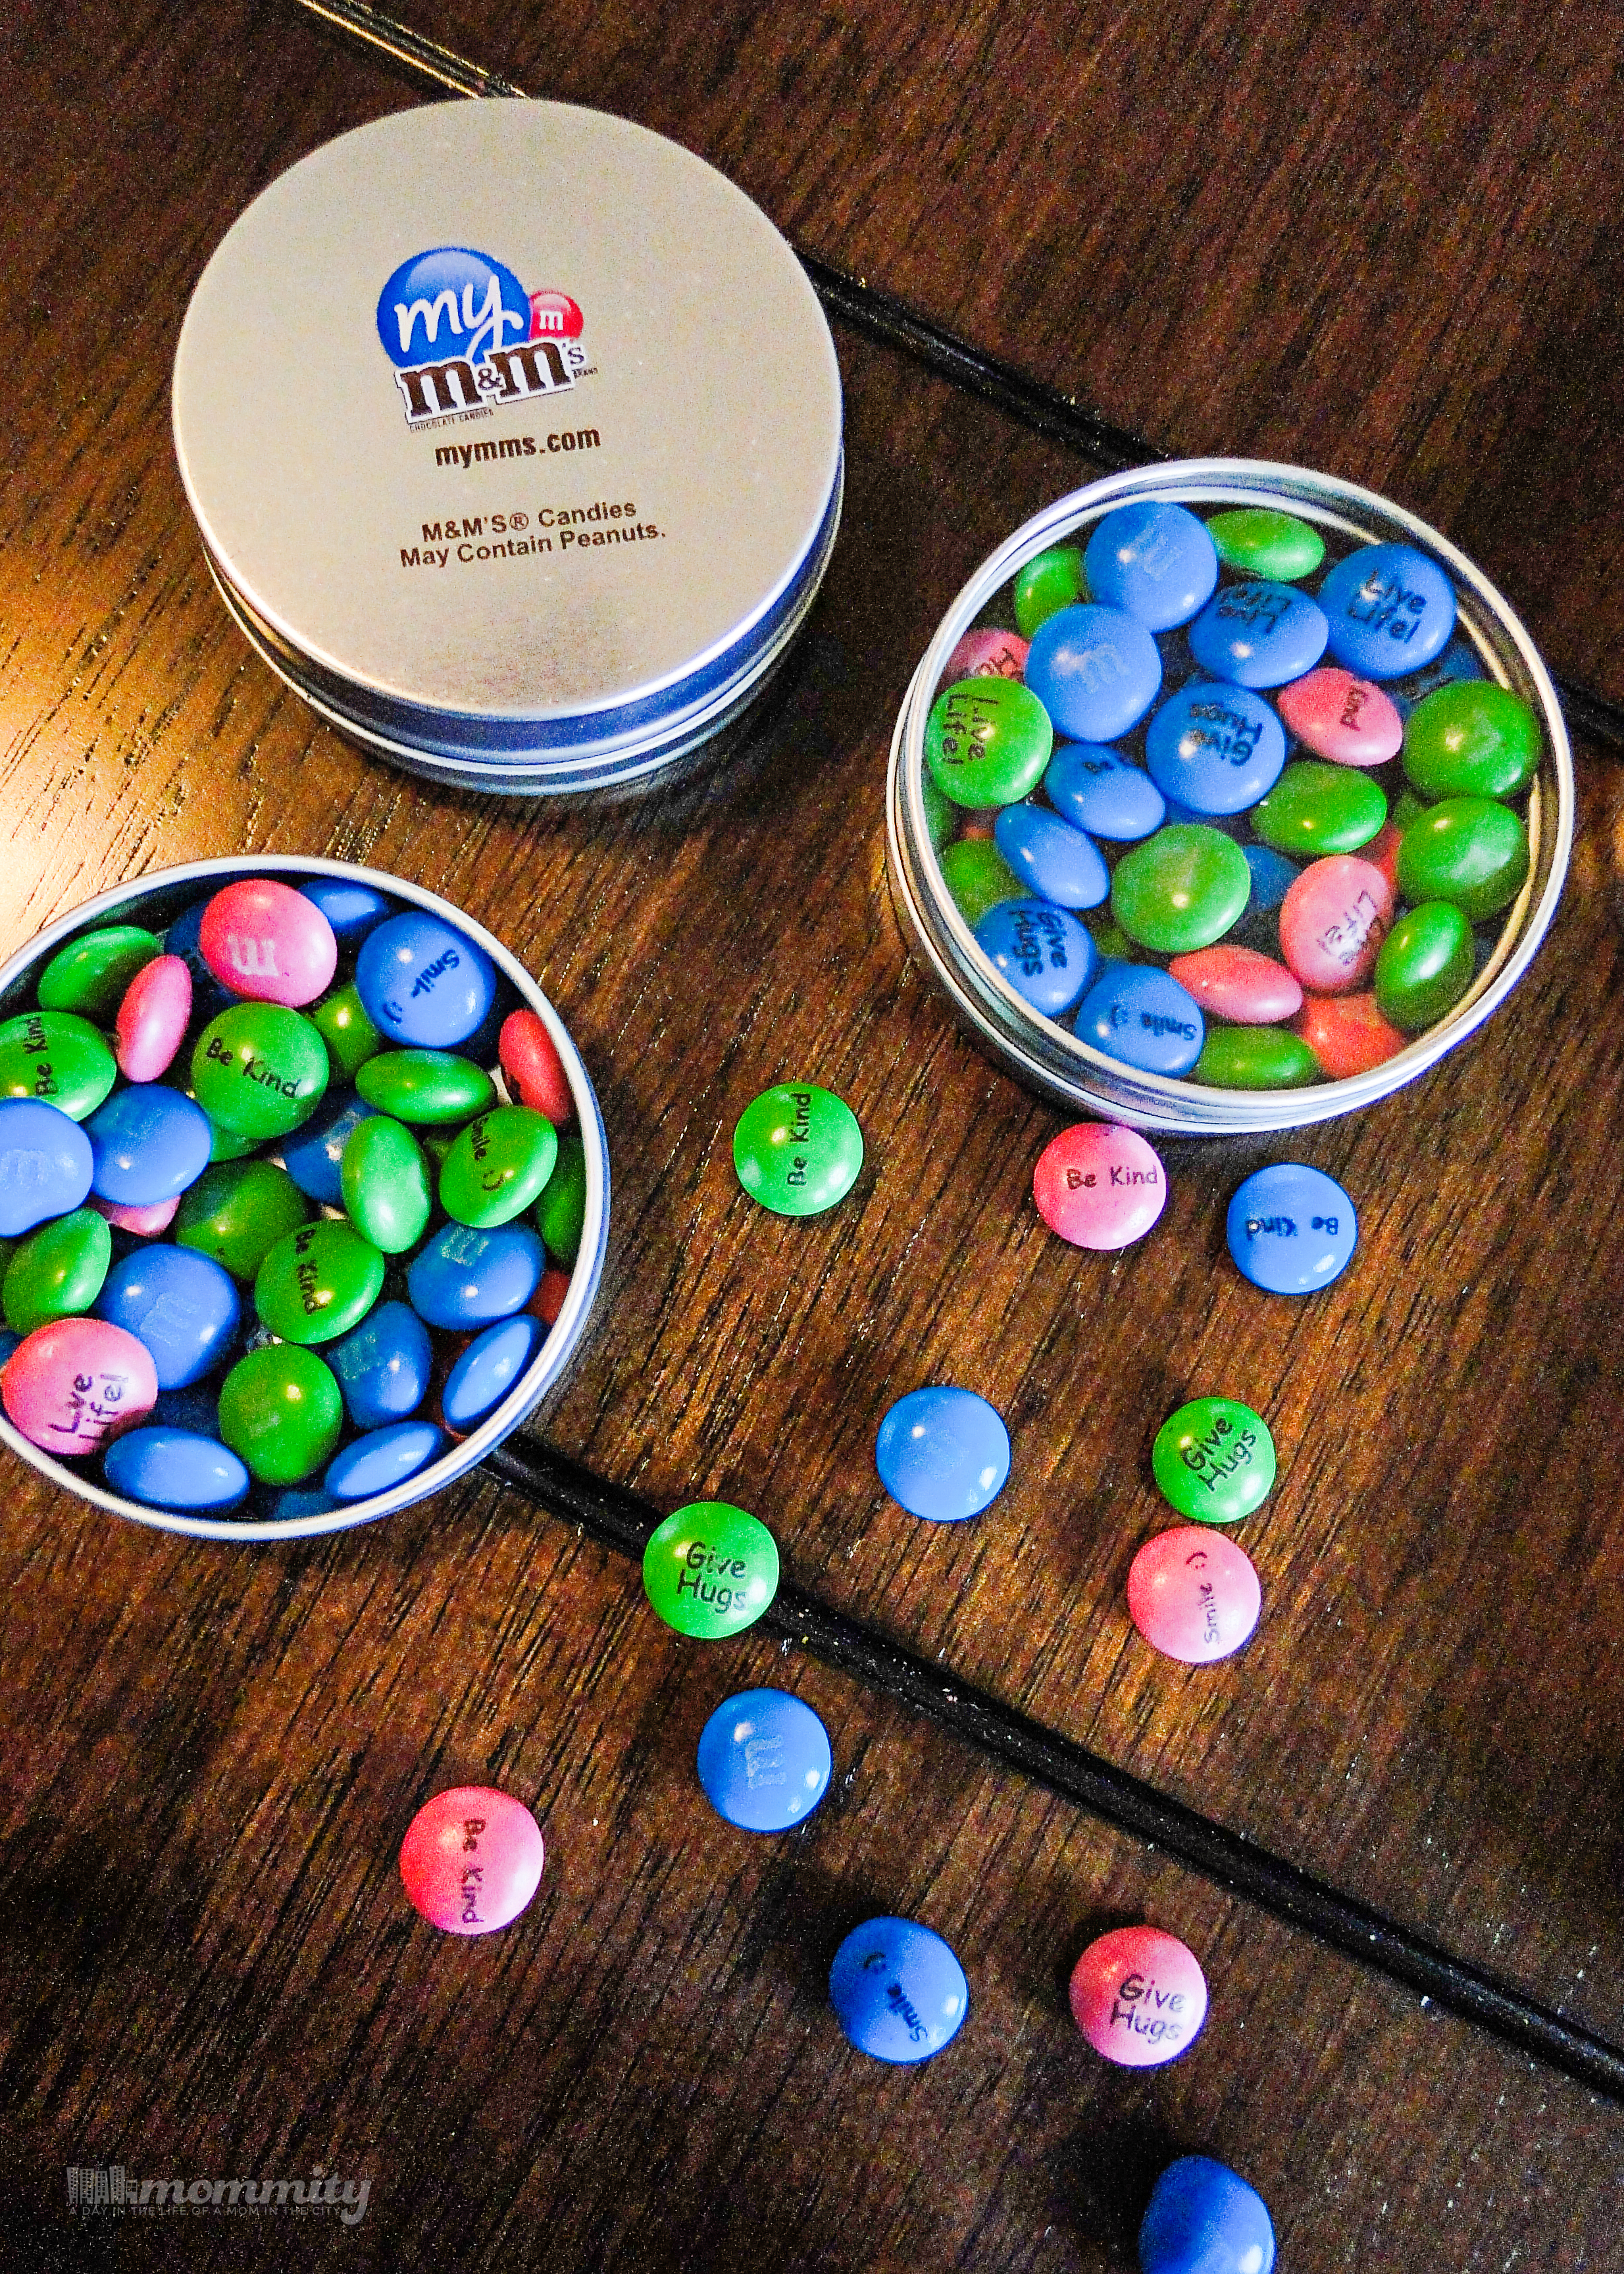 Spreading Some Cheer with My M&M's - Free ROAK Printable!